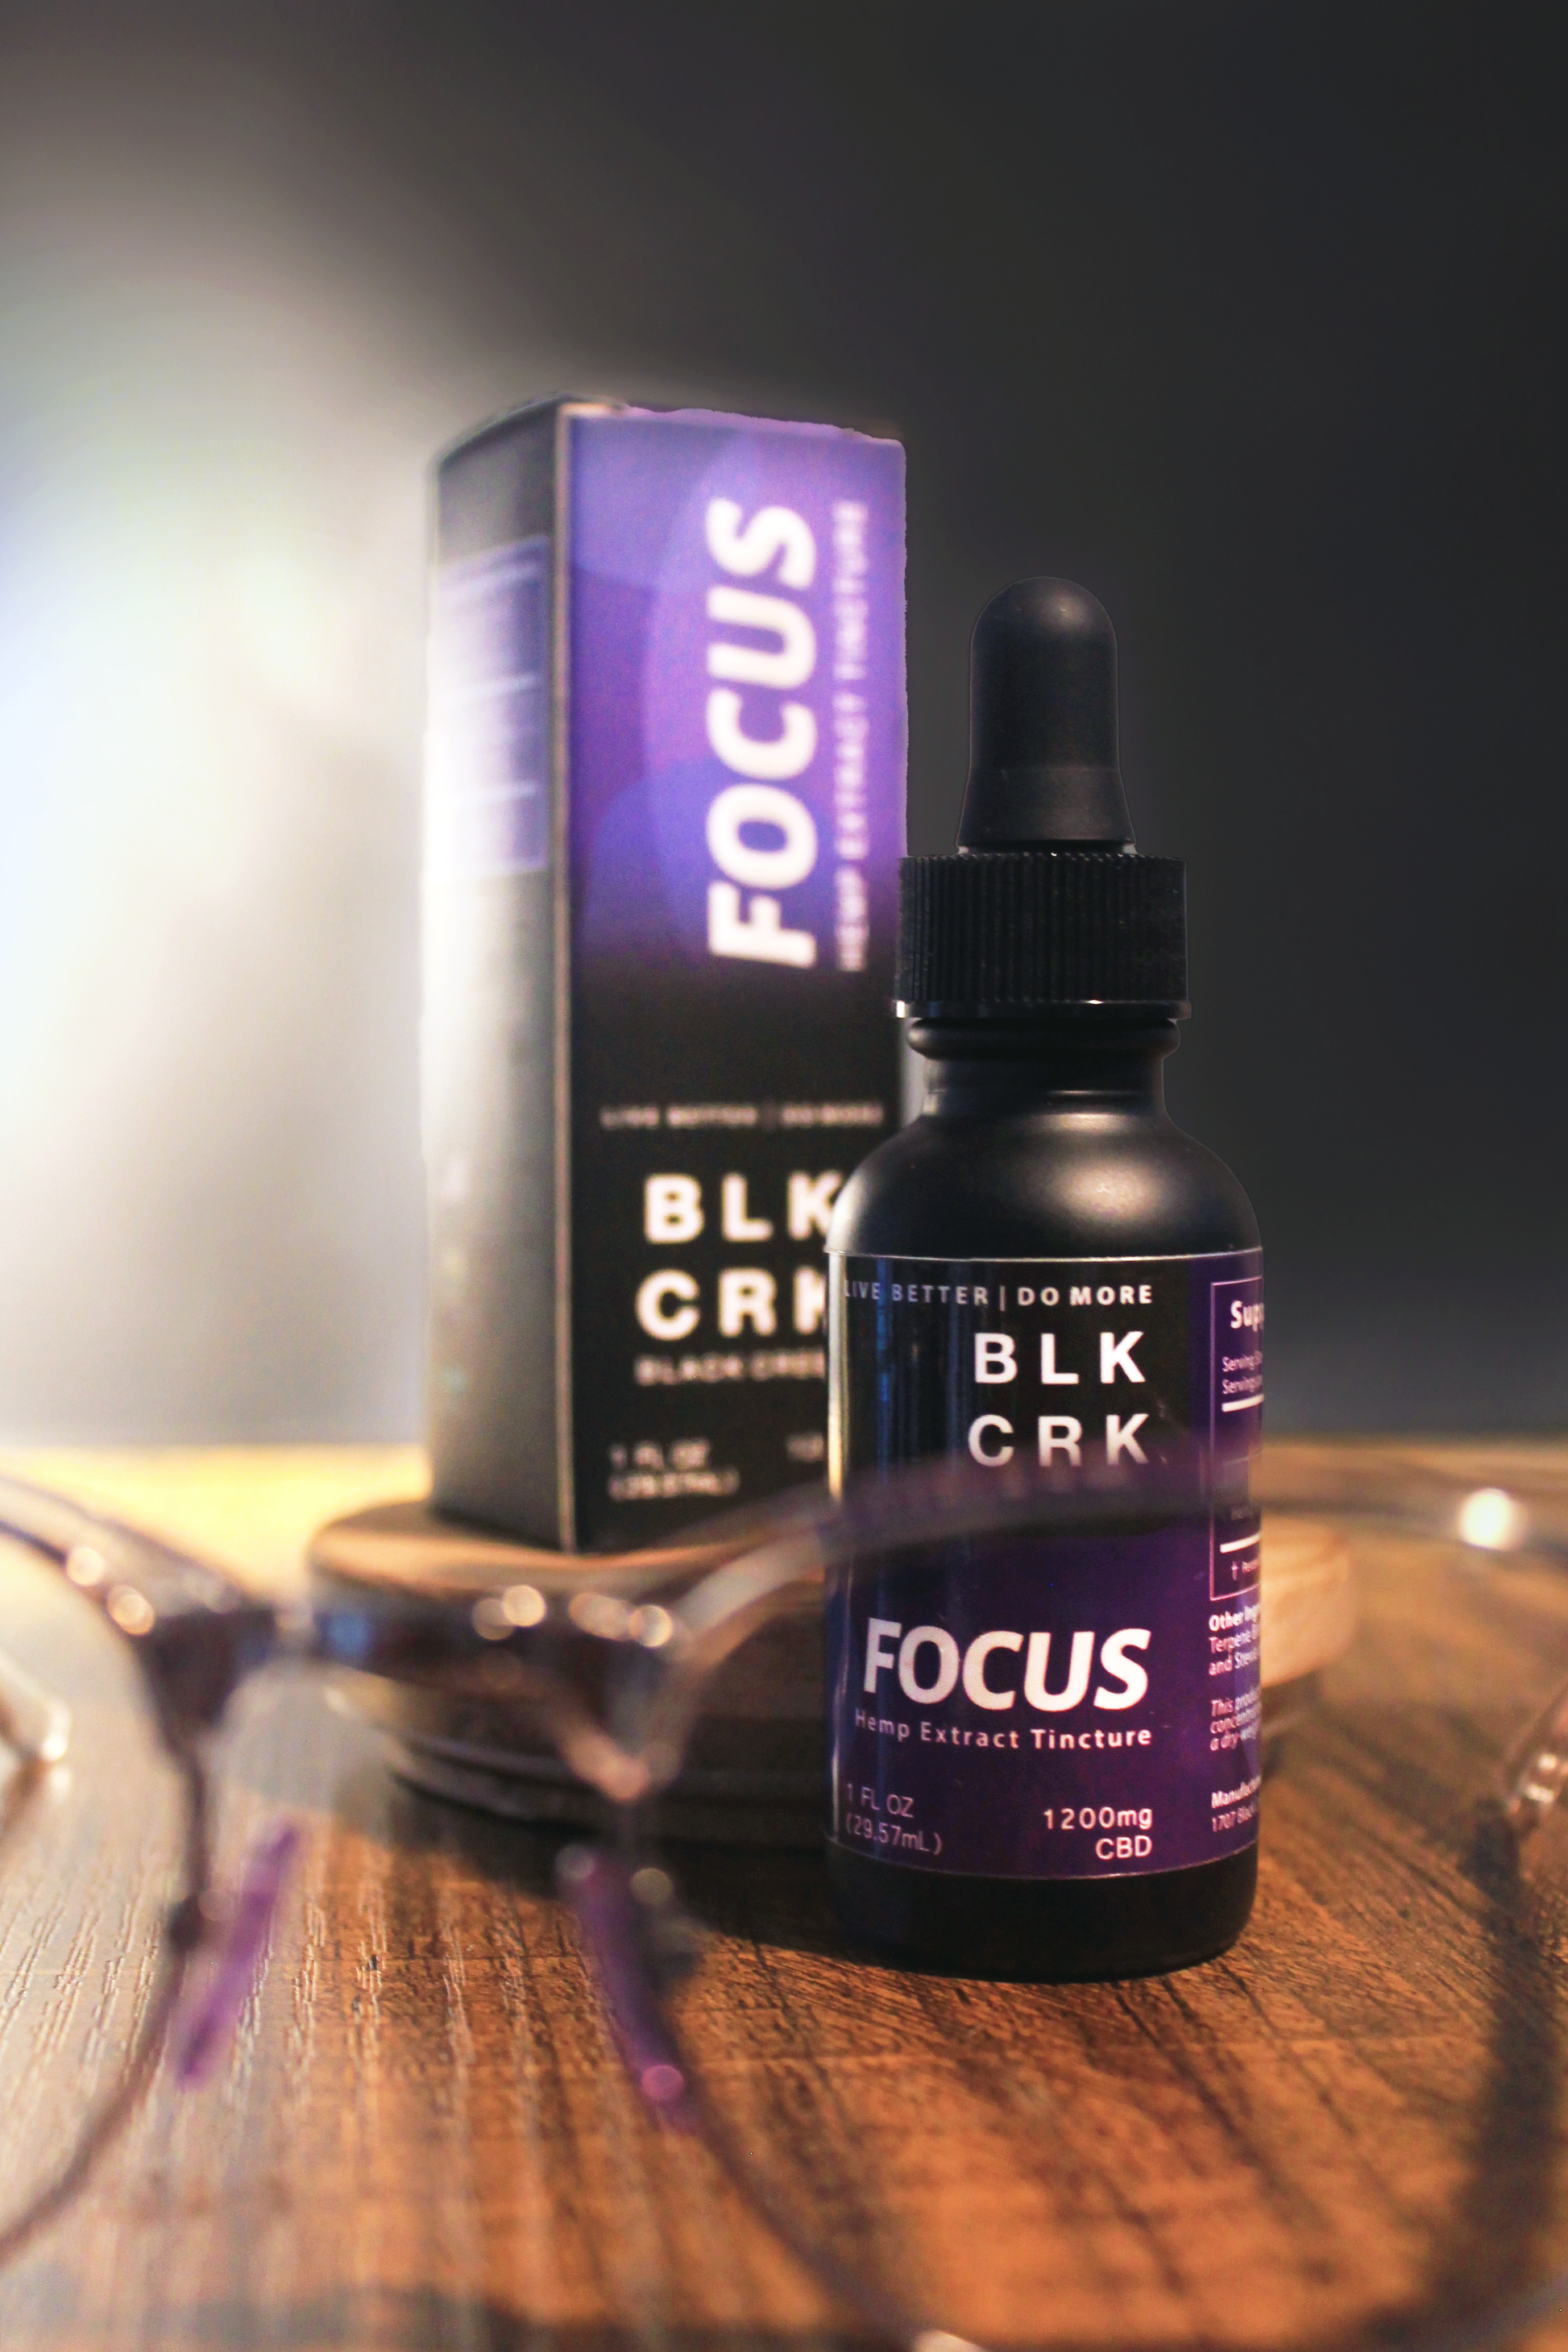 Black Creek CBD's Focus Tincture with a pair of glasses highlighting the word Focus. Standing on a wooden surface with a black background